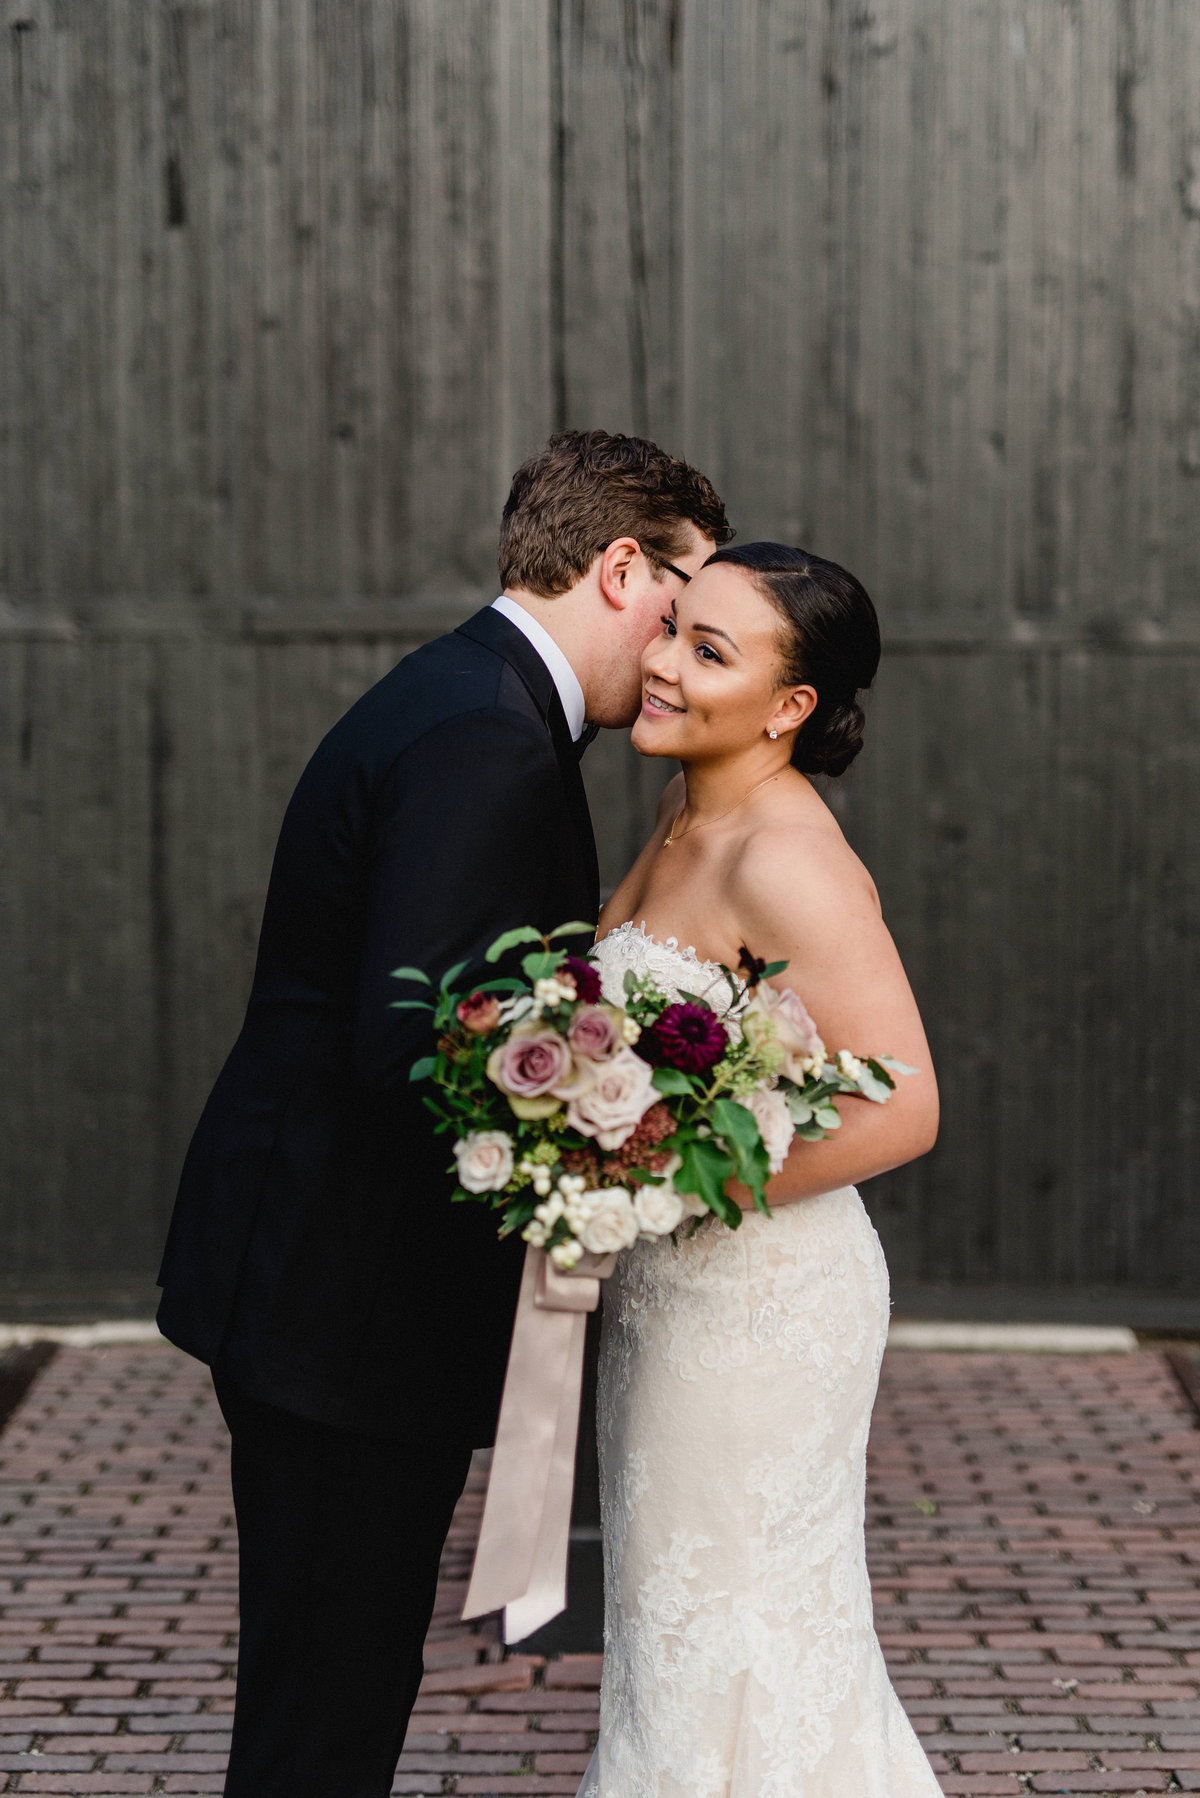 Featured in Martha Stewart Weddings Steamwhistle Brewery Downtown Toronto CN Tower Bride and Groom Portraits Modern Romantic Luxe Elegant Fall Wedding | Jacqueline James Photography for modern wild romantics